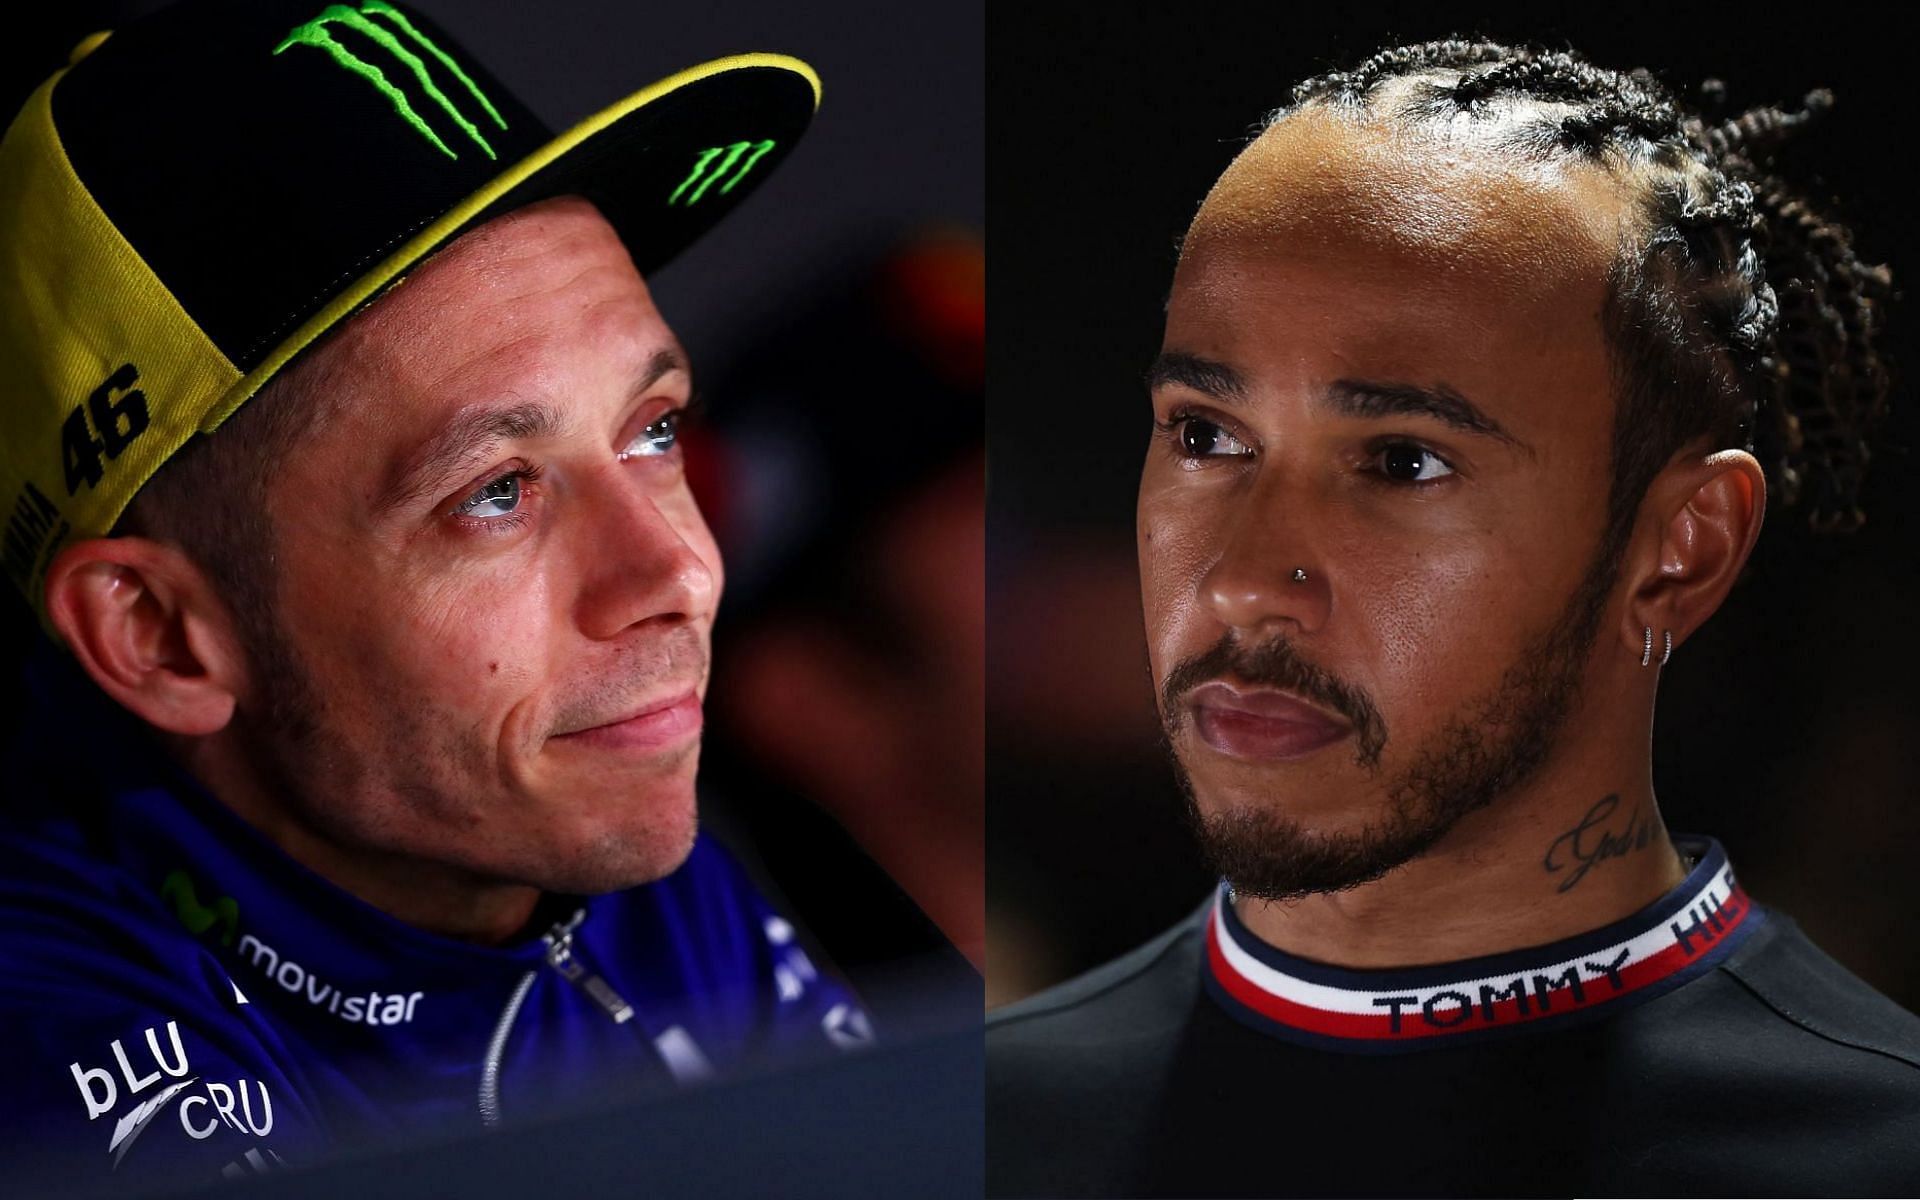 Valentino Rossi (left) and Lewis Hamilton (right) each have seven world championship titles in MotoGP (premier class) and Formula 1 respectively